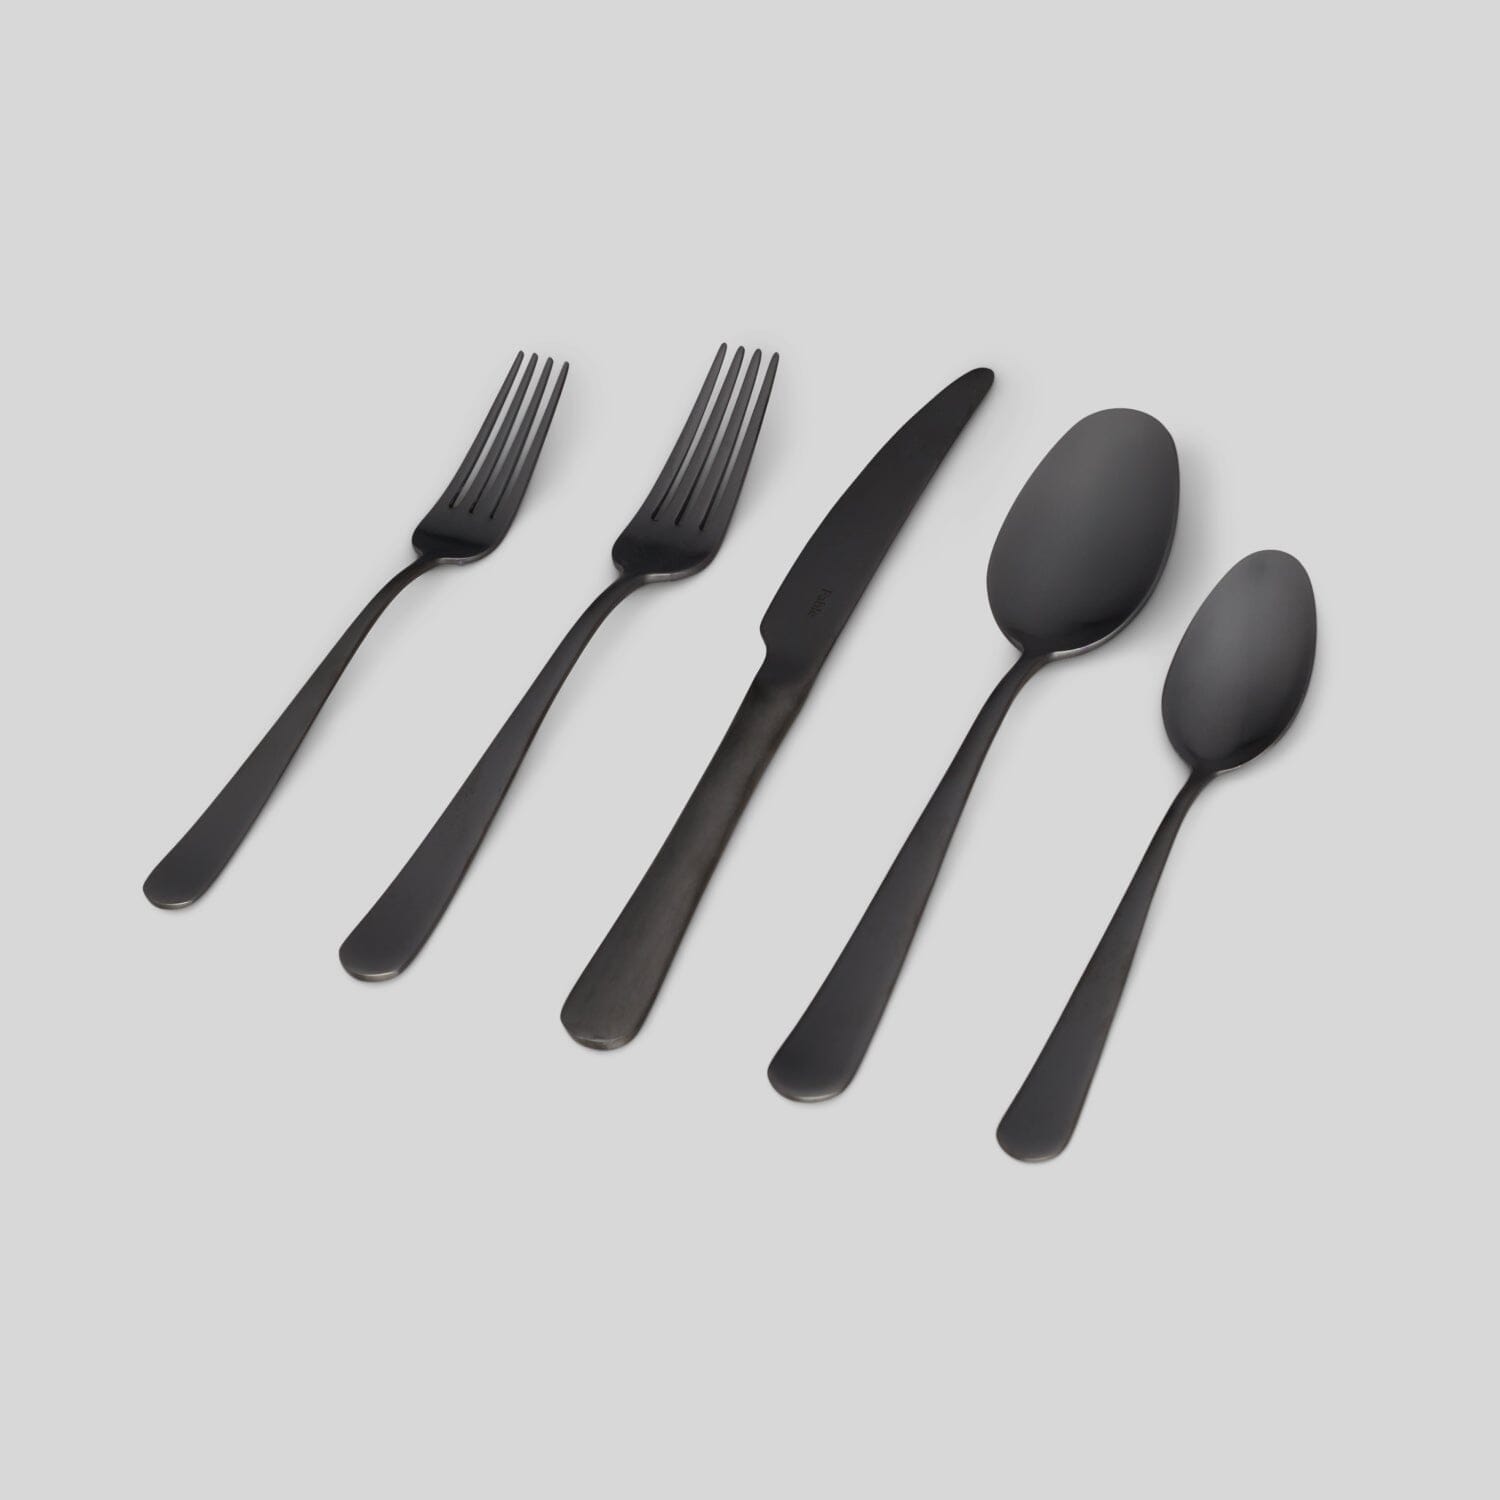 LuxoSlice Complete Luxury Black Cutlery Flatware Set with Rust-Resistant  Stainless Steel and Beautiful Matte Finish - Vysta Home